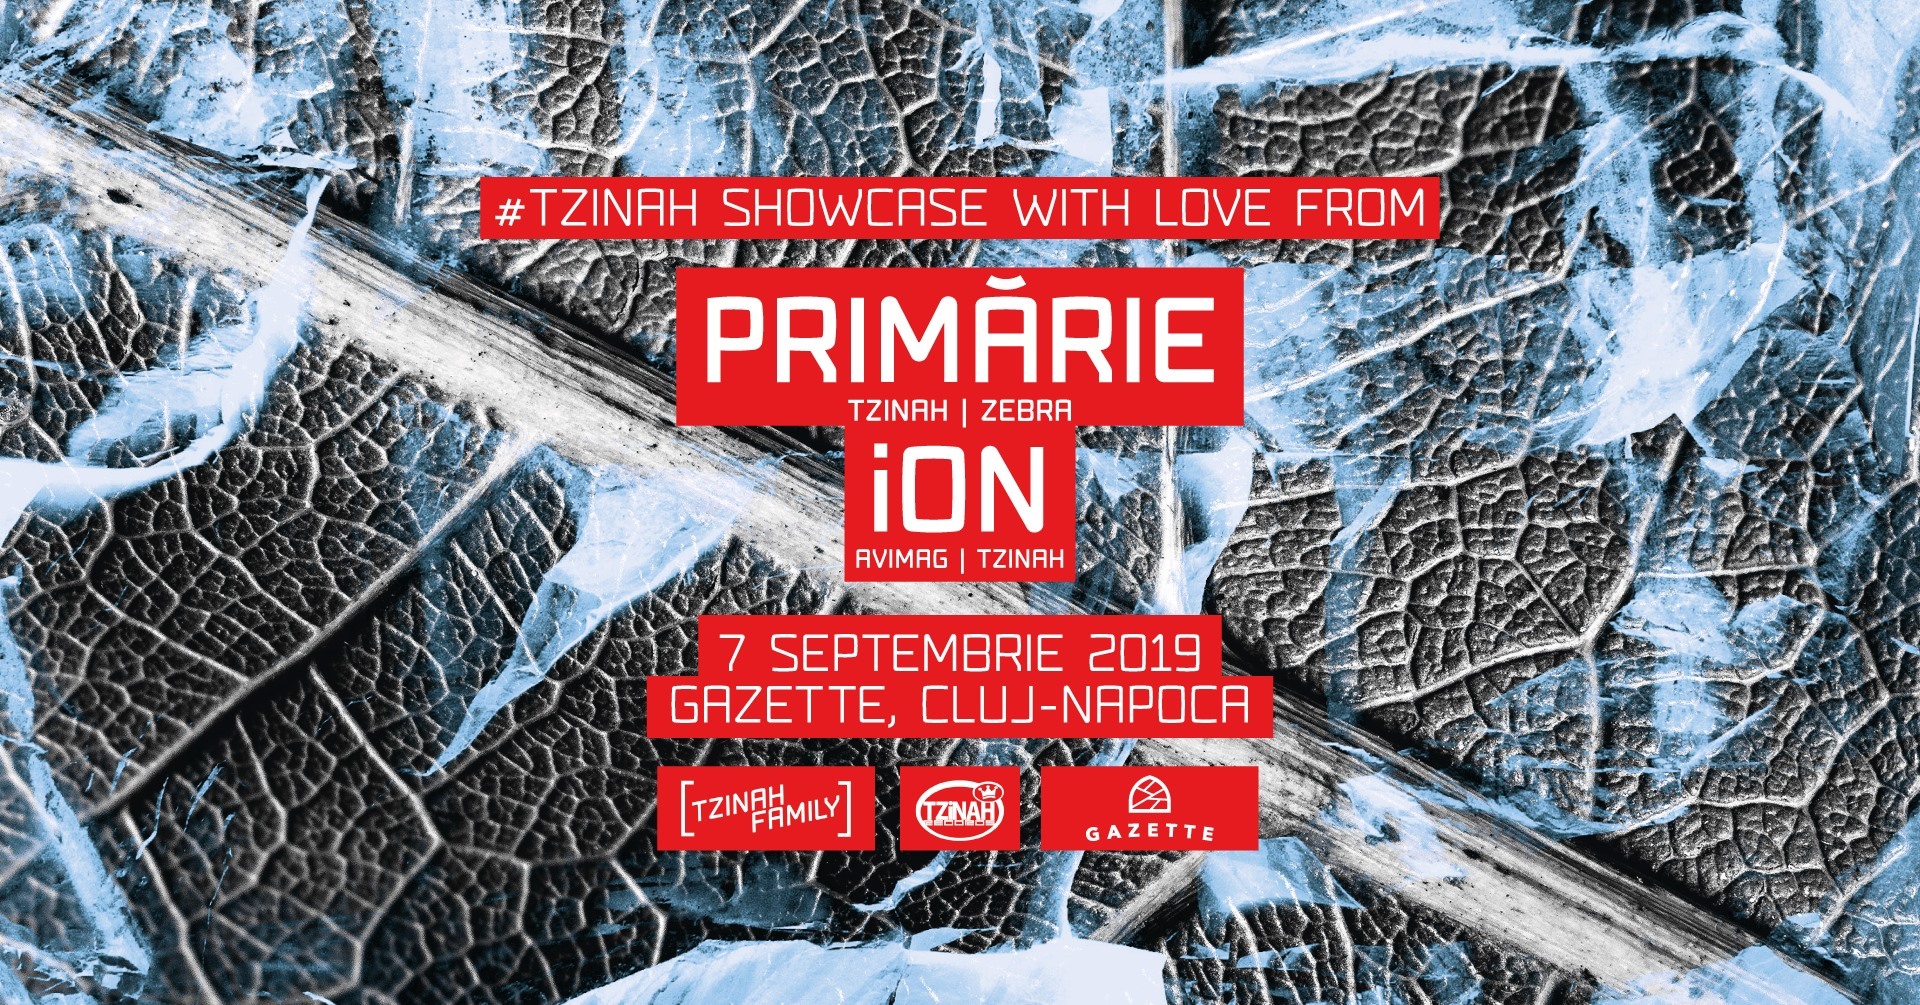 Tzinah Showcase with Love from: Primărie and iON